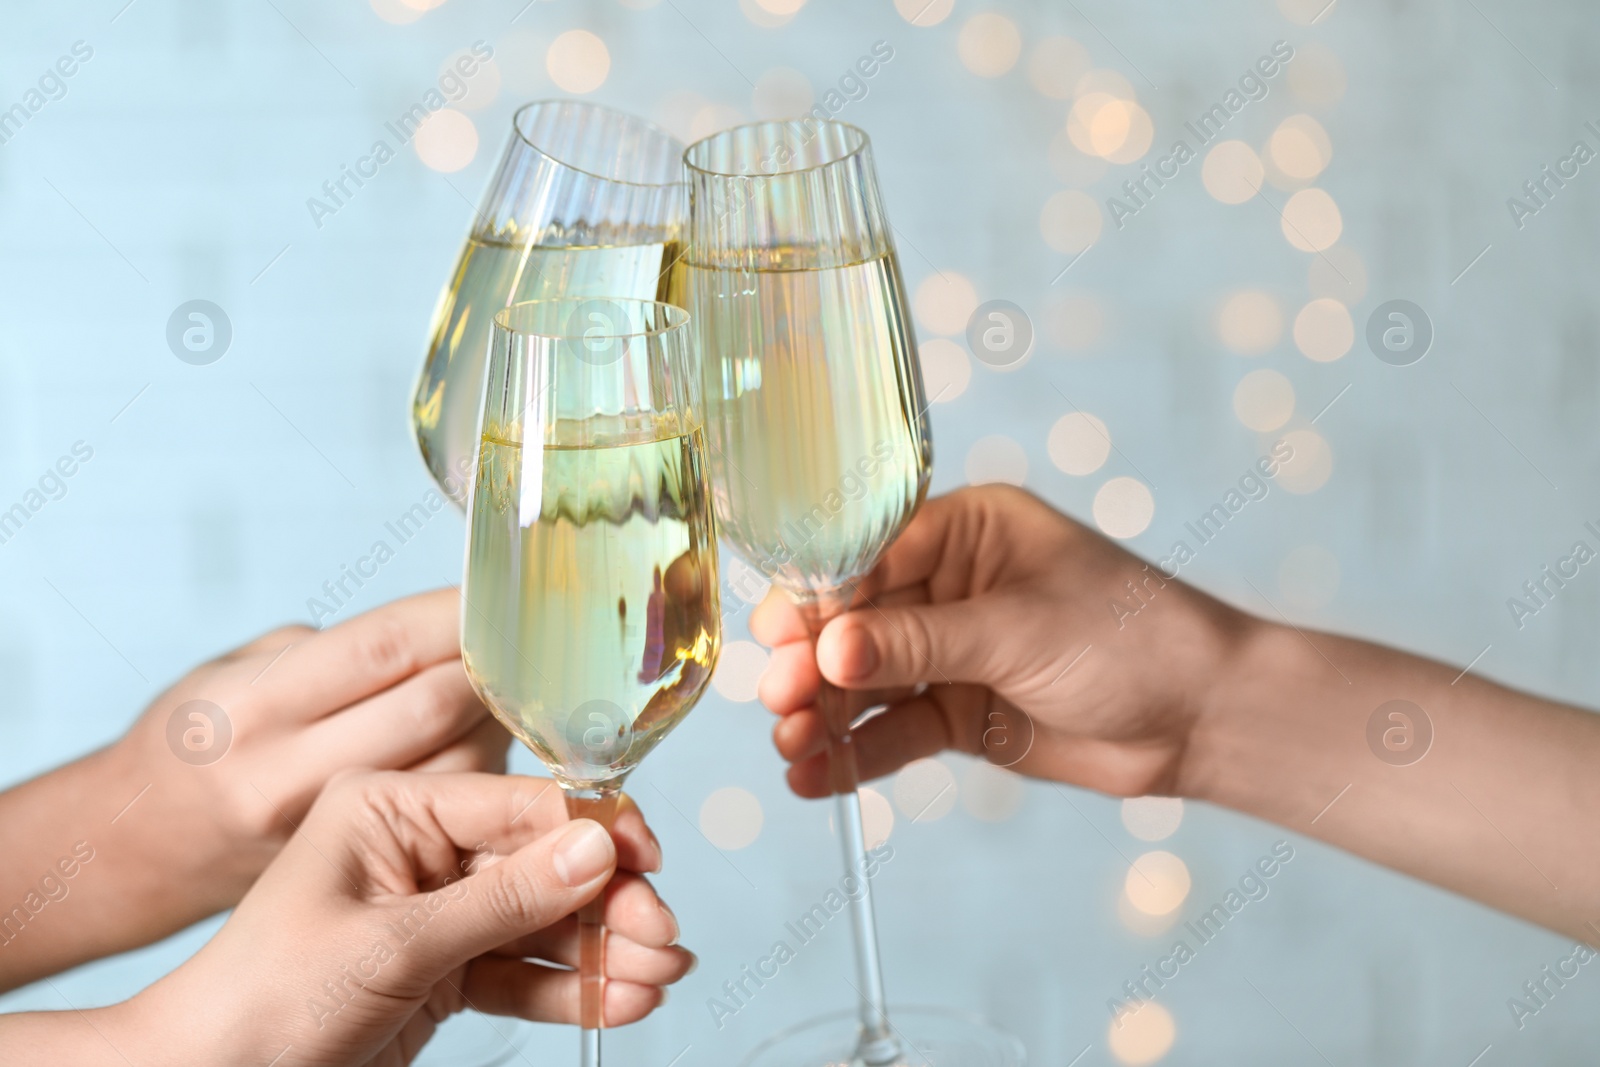 Photo of People clinking glasses of champagne against blurred lights, closeup